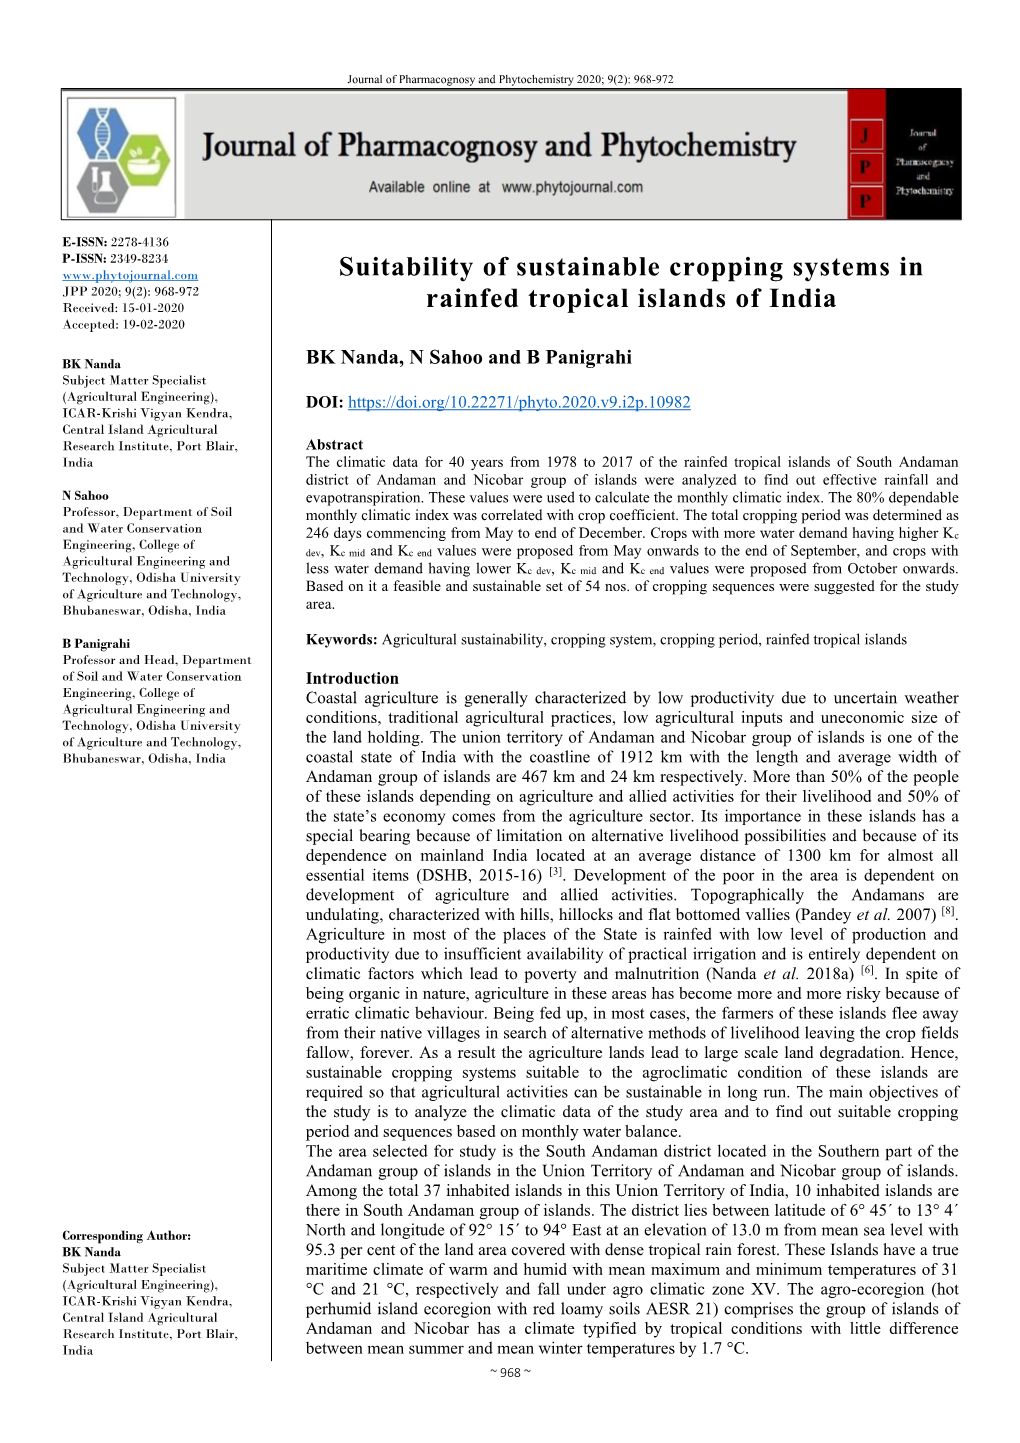 Suitability of Sustainable Cropping Systems in Rainfed Tropical Islands